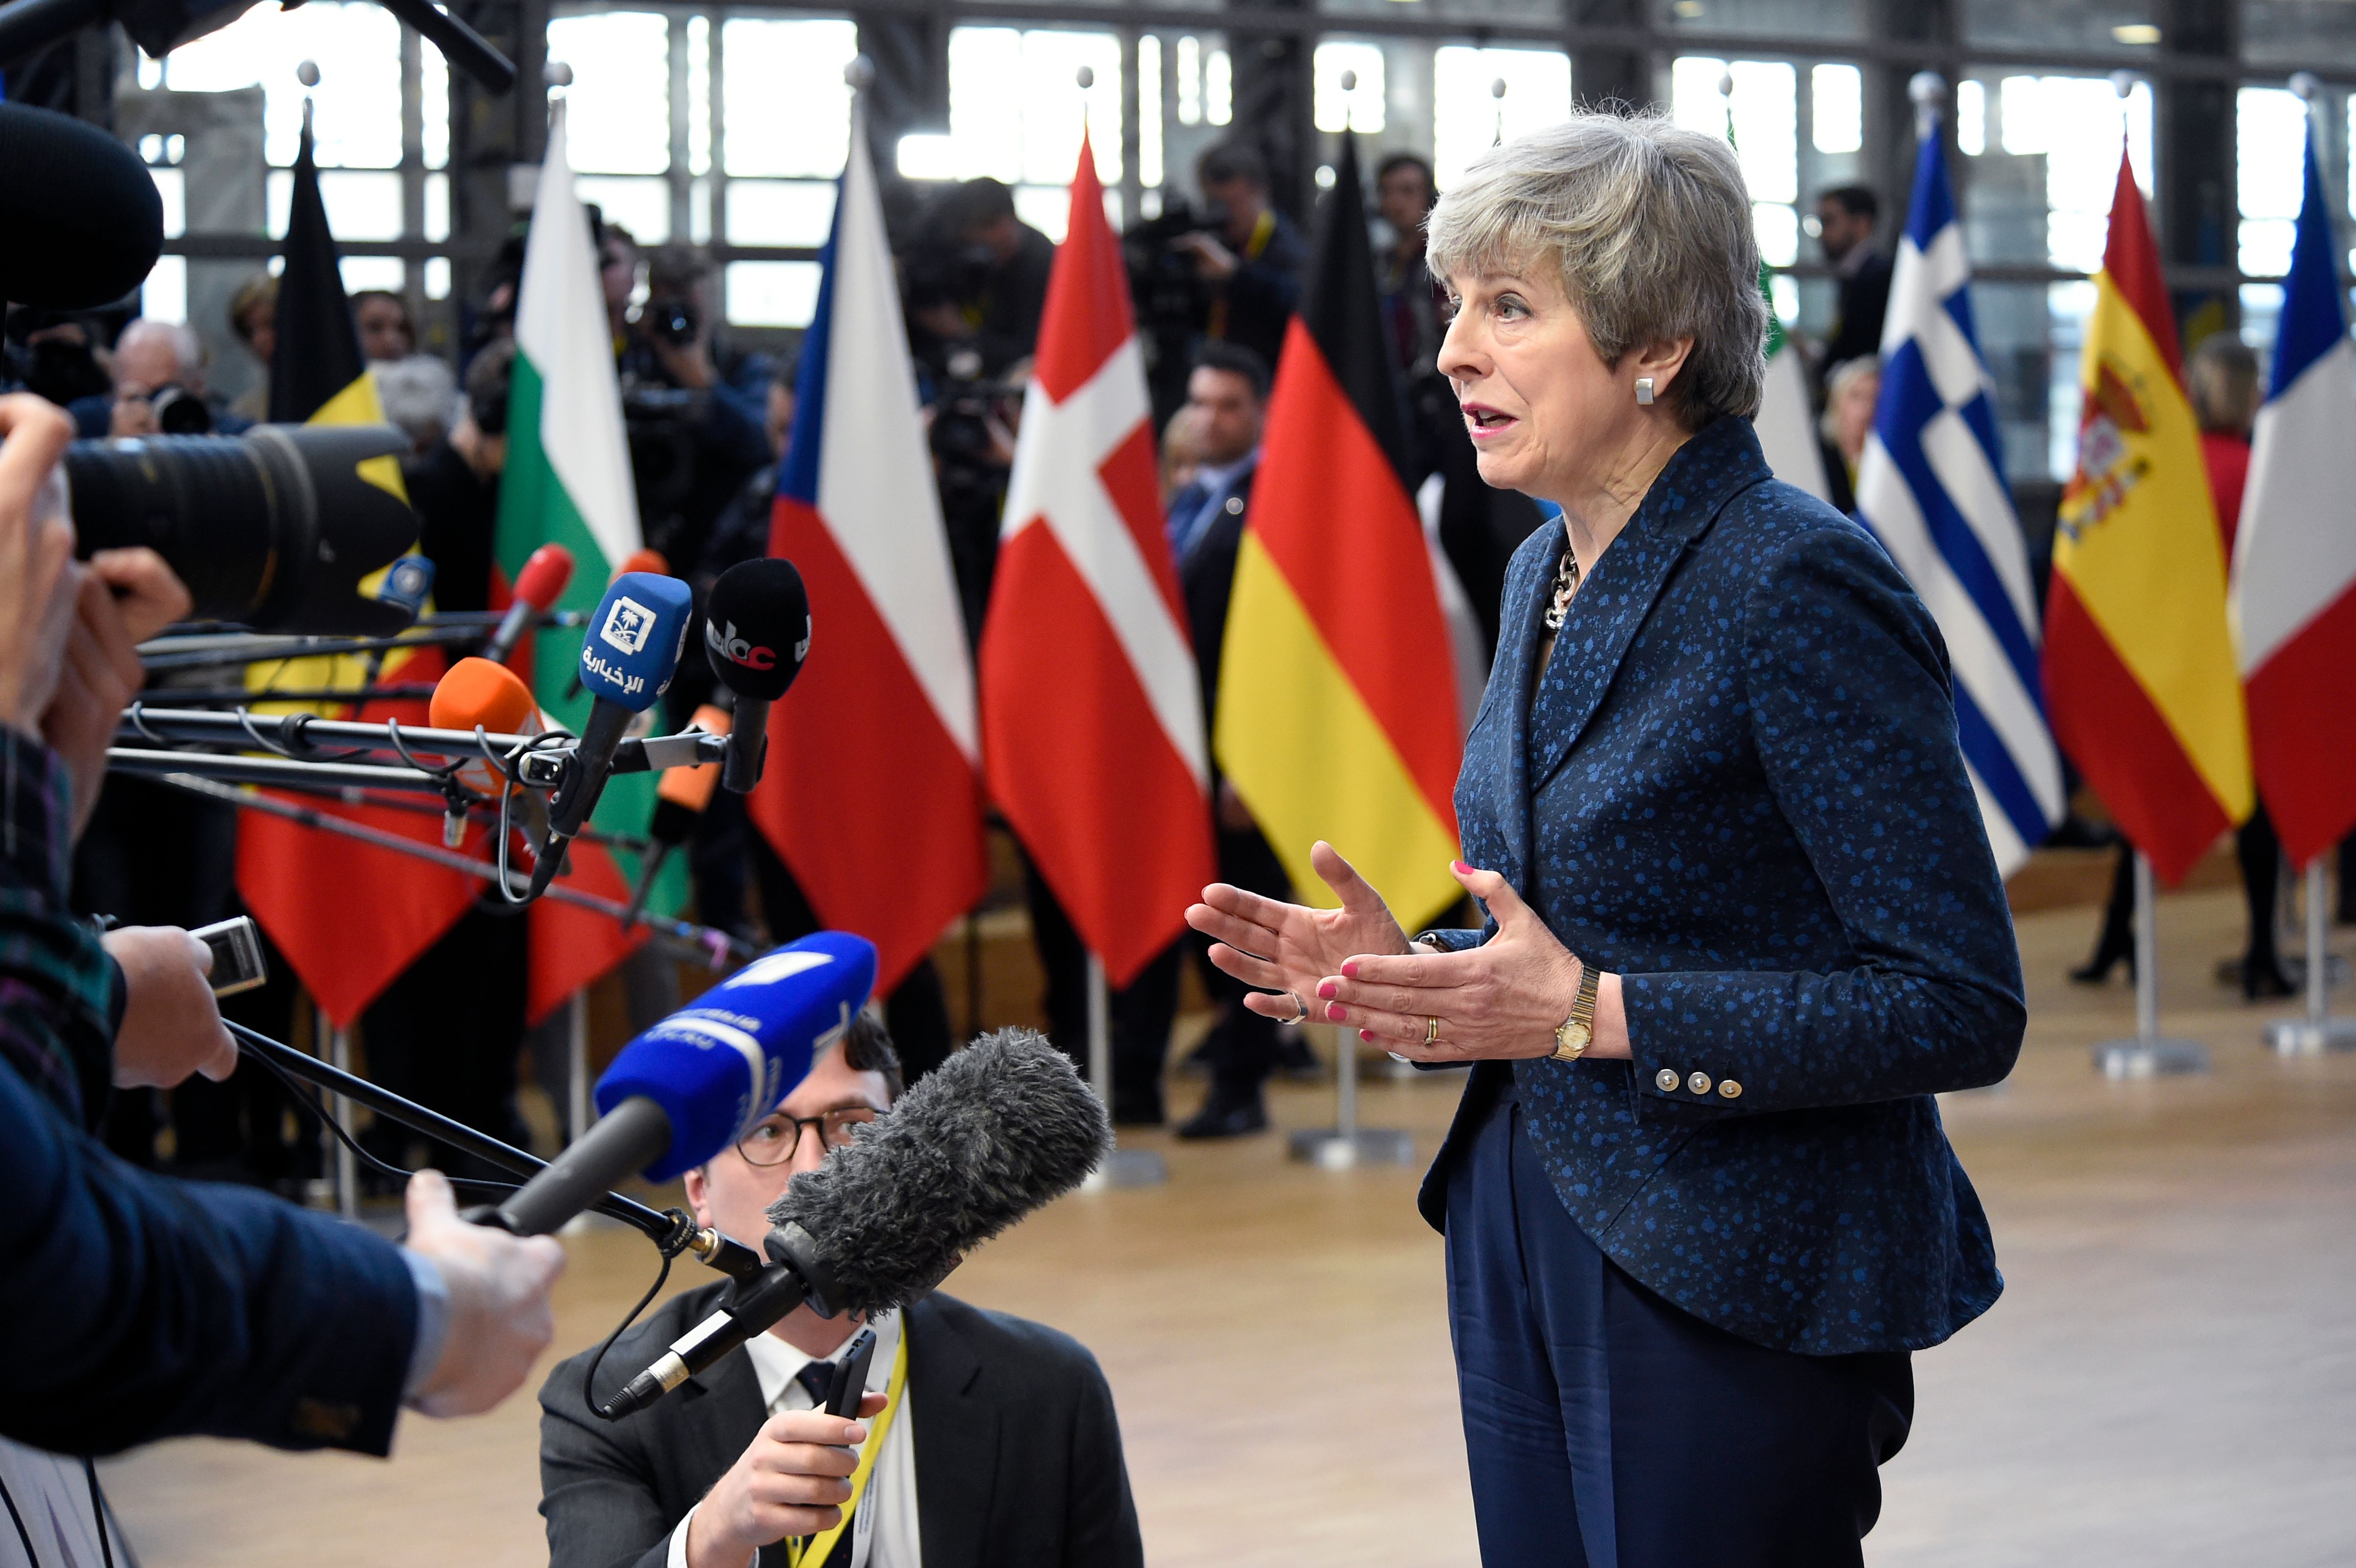 Theresa May speaks to reporters after arriving at the EU summit.